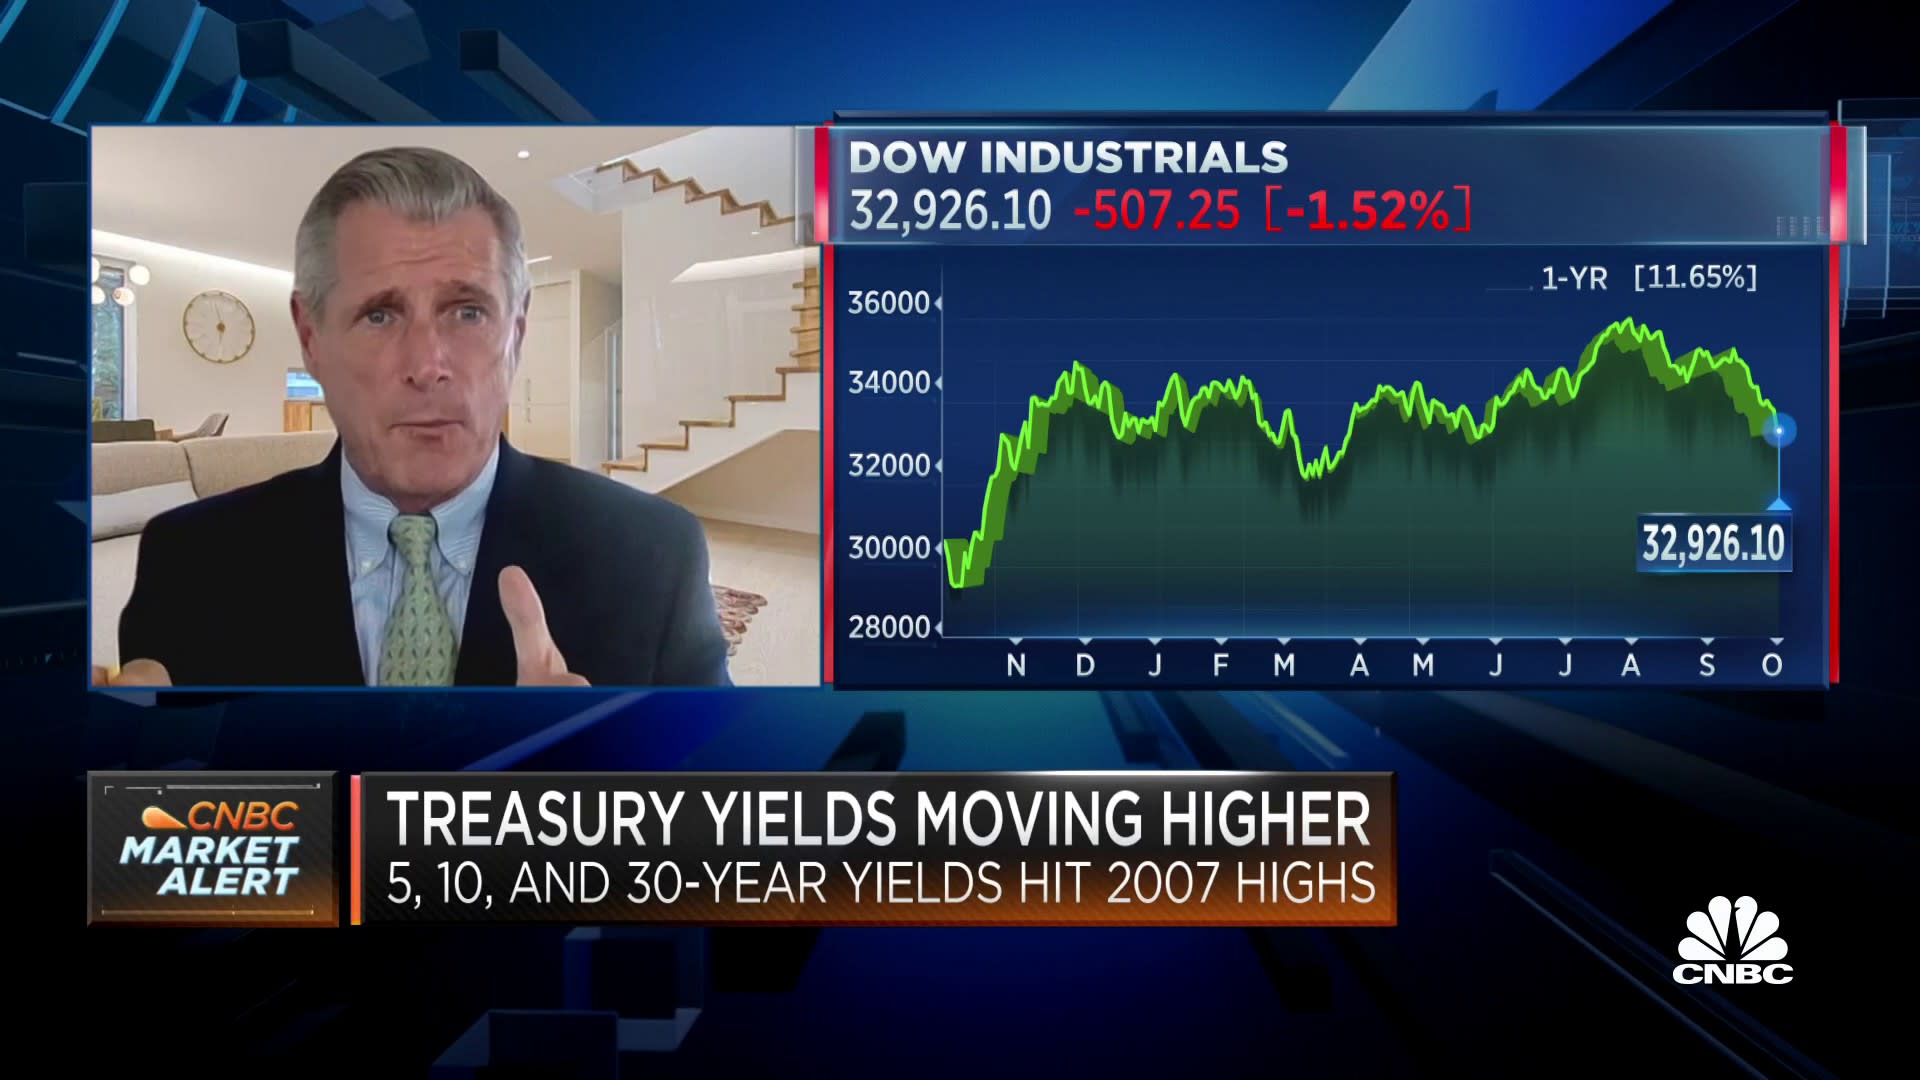 Markets are in lock step with yields, says B. Riley's Art Hogan